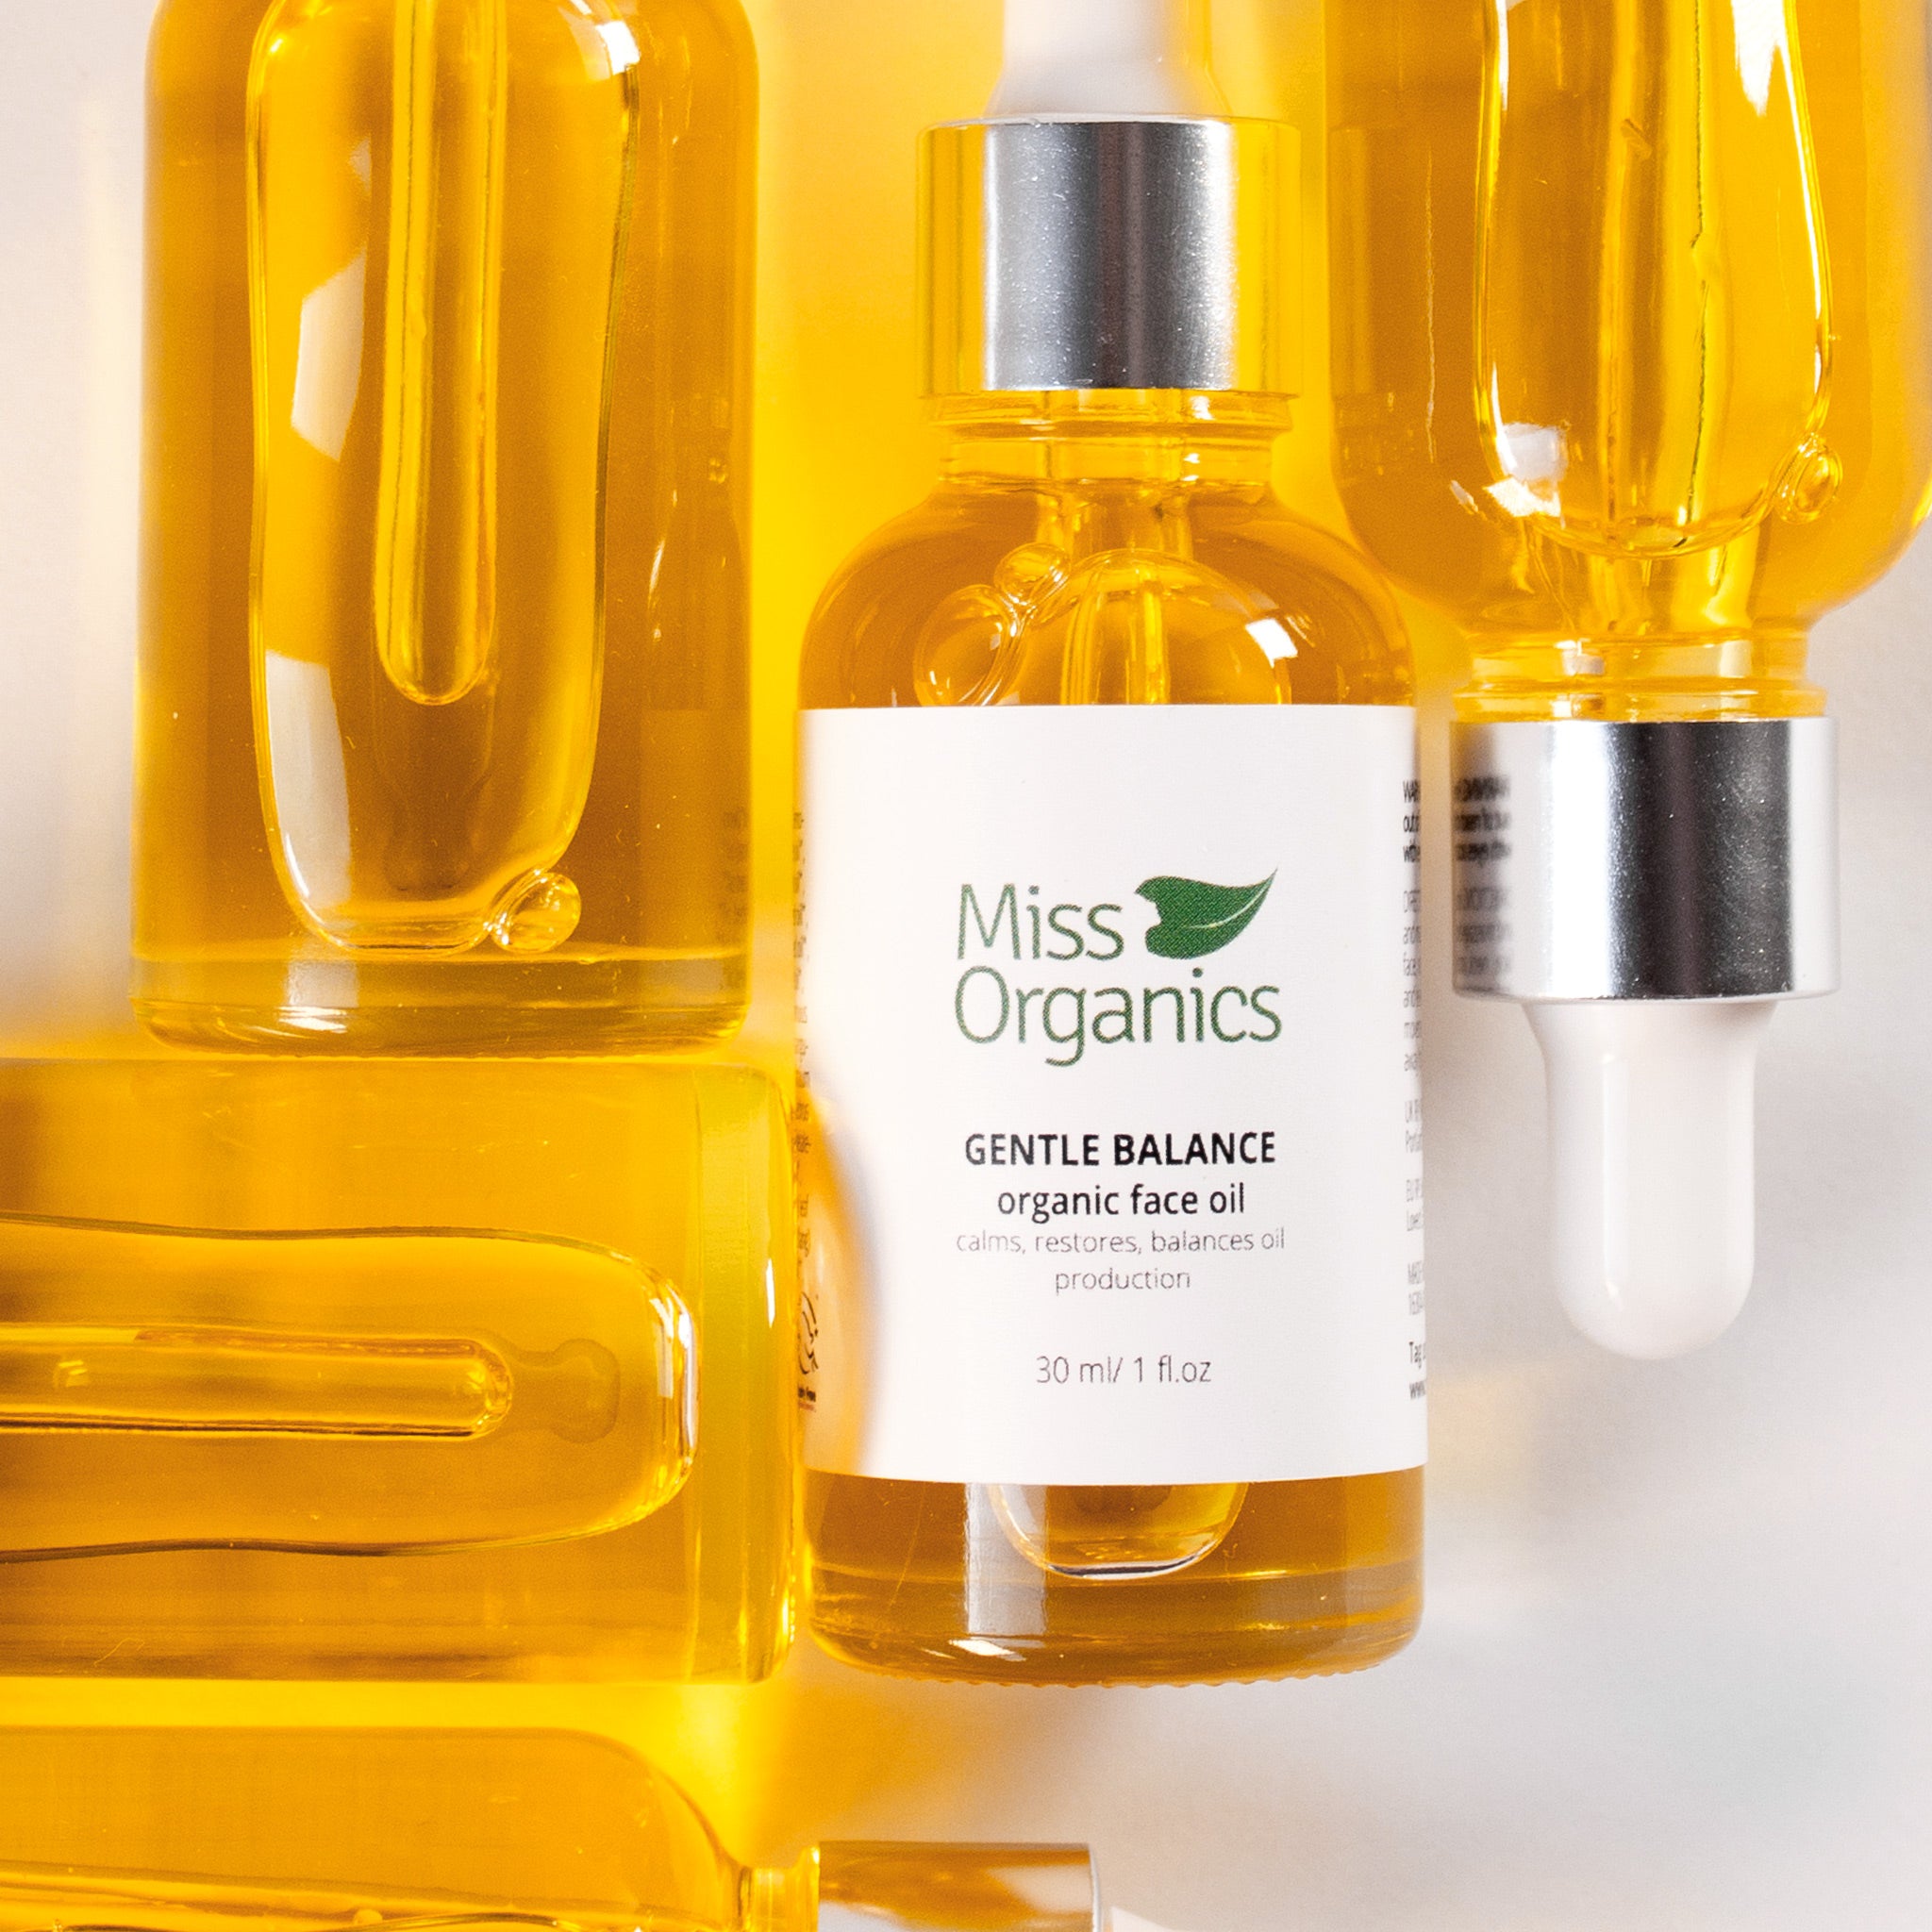 Gentle Balance Organic Face Oil in glass bottle on stone background by Miss Organics